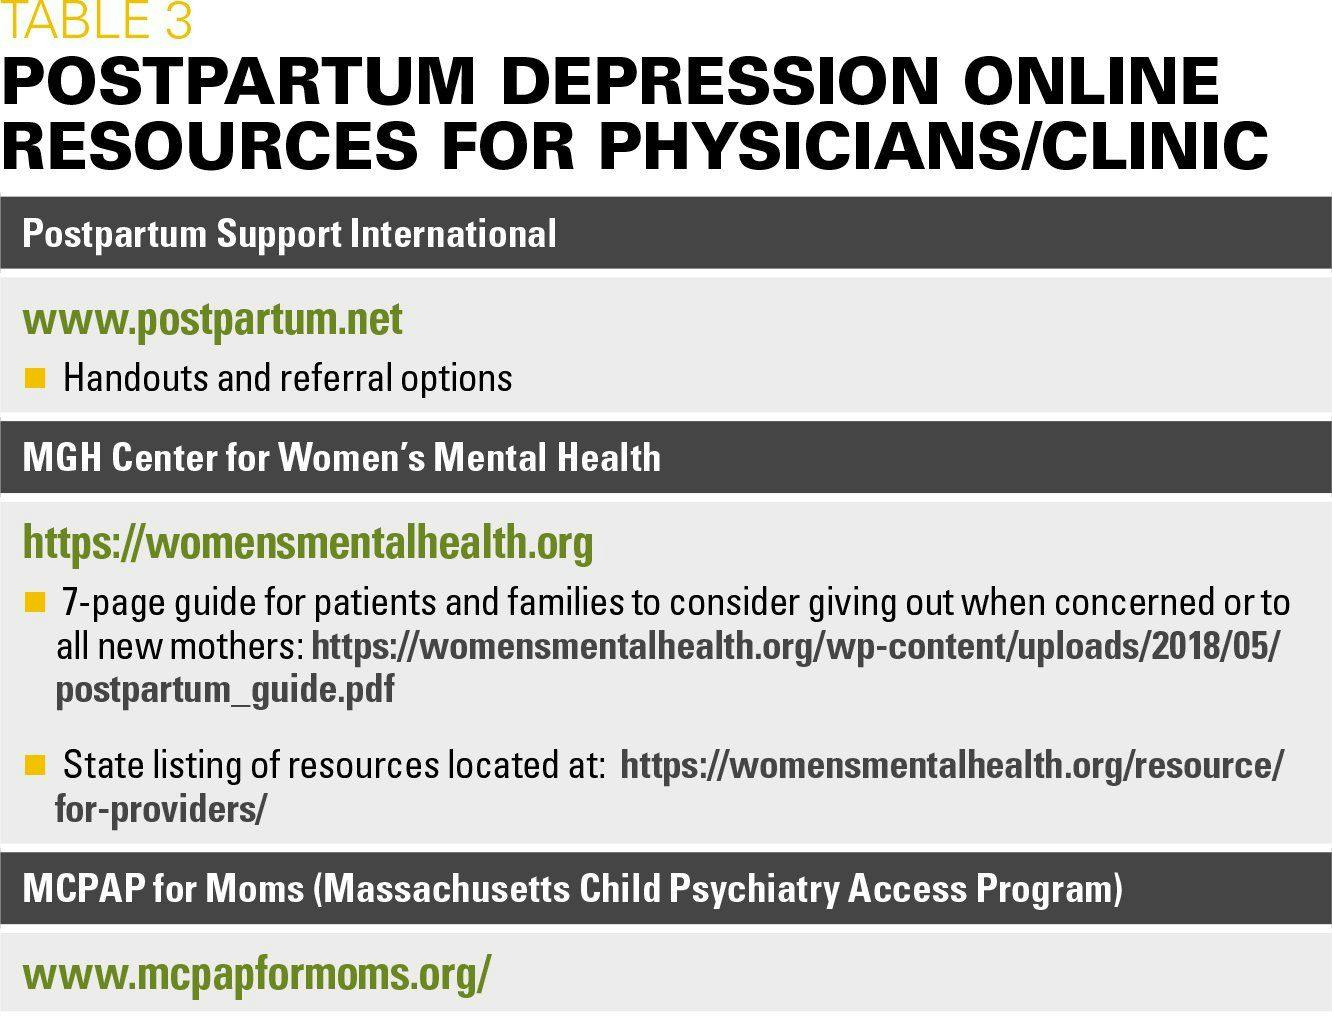 Postpartum depression online resources for physicians/clinic